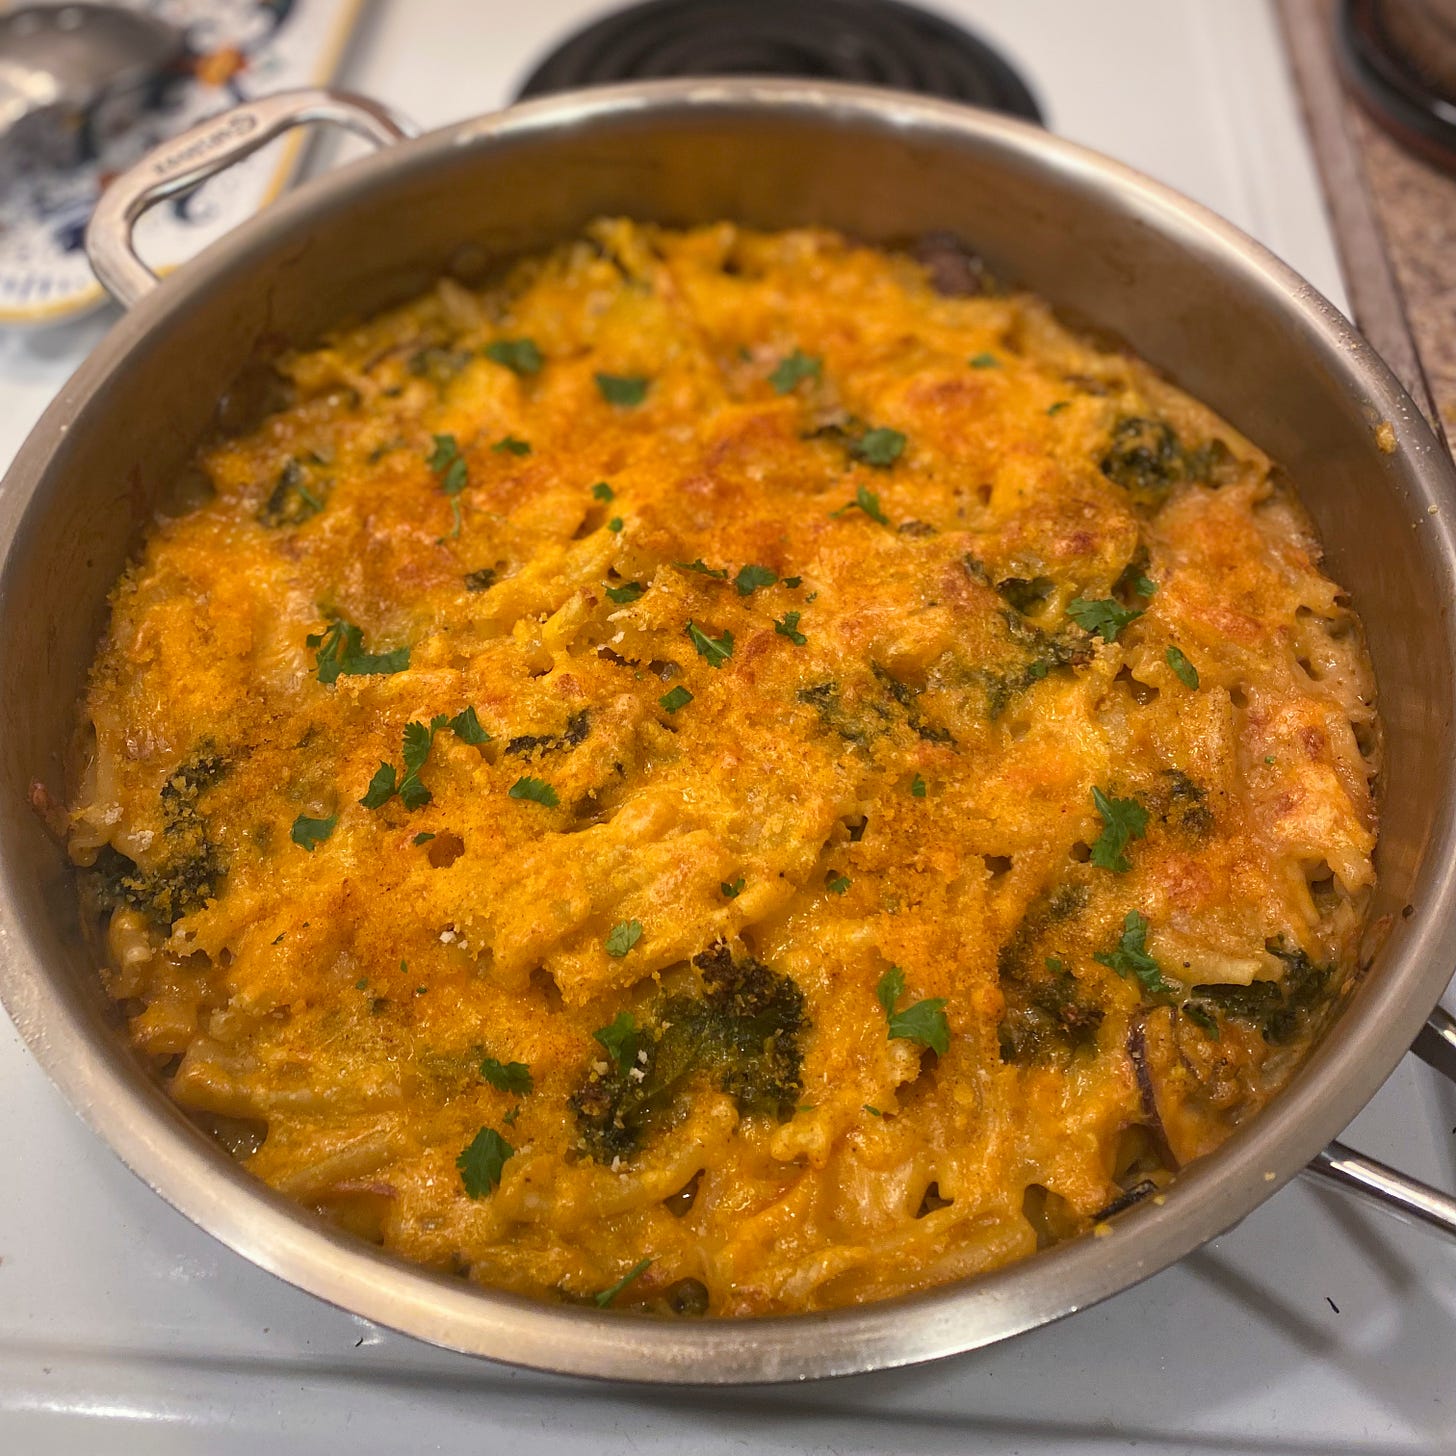 A large stainless steel pan full of yellow-orange mac & cheeze, with bits of kale throughout. On top is a browned crust of cheeze and breadcrumbs, and it is sprinkled with cilantro.